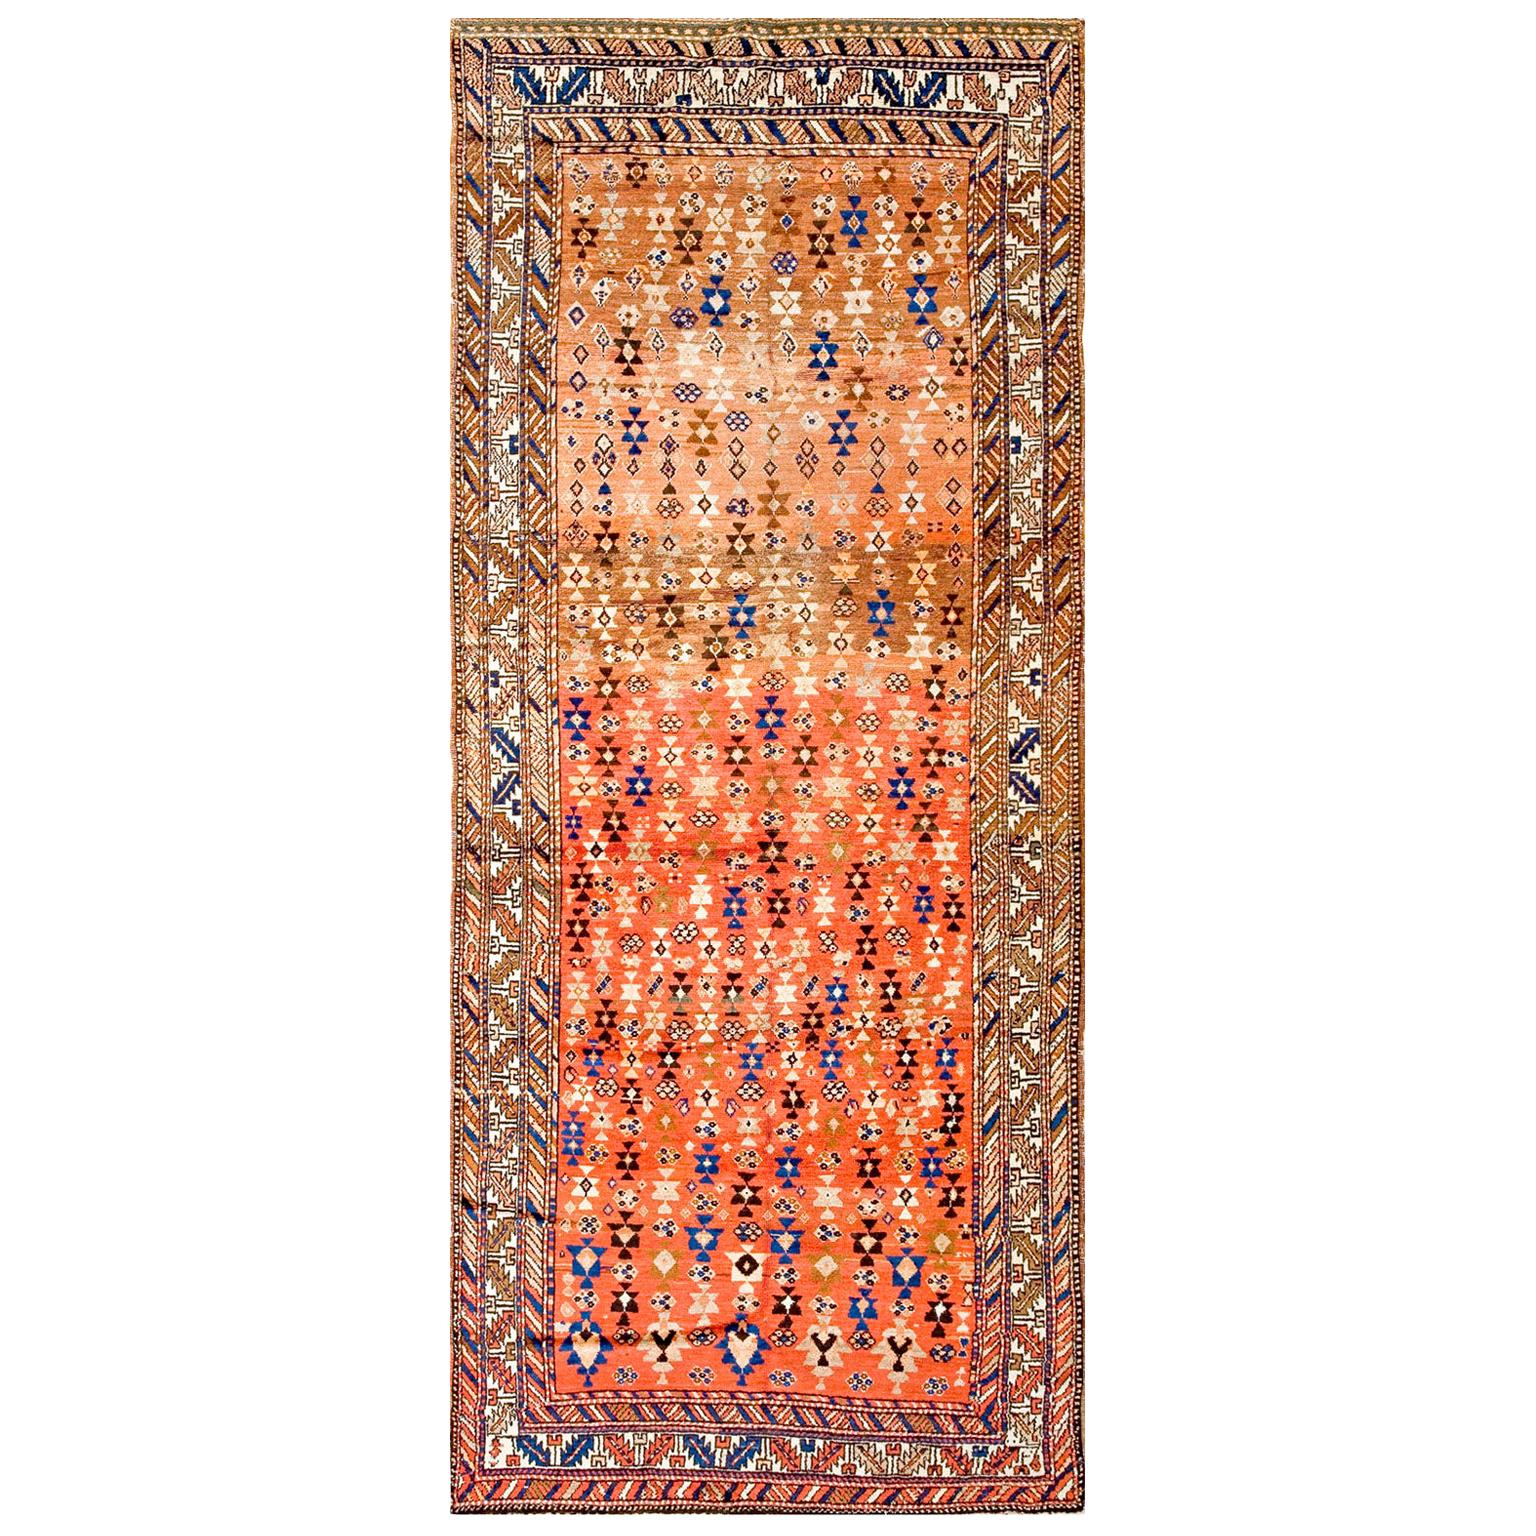 Early 20th Century N.W. Persian Carpet ( 4'10" x 11  147 x 335 ) For Sale